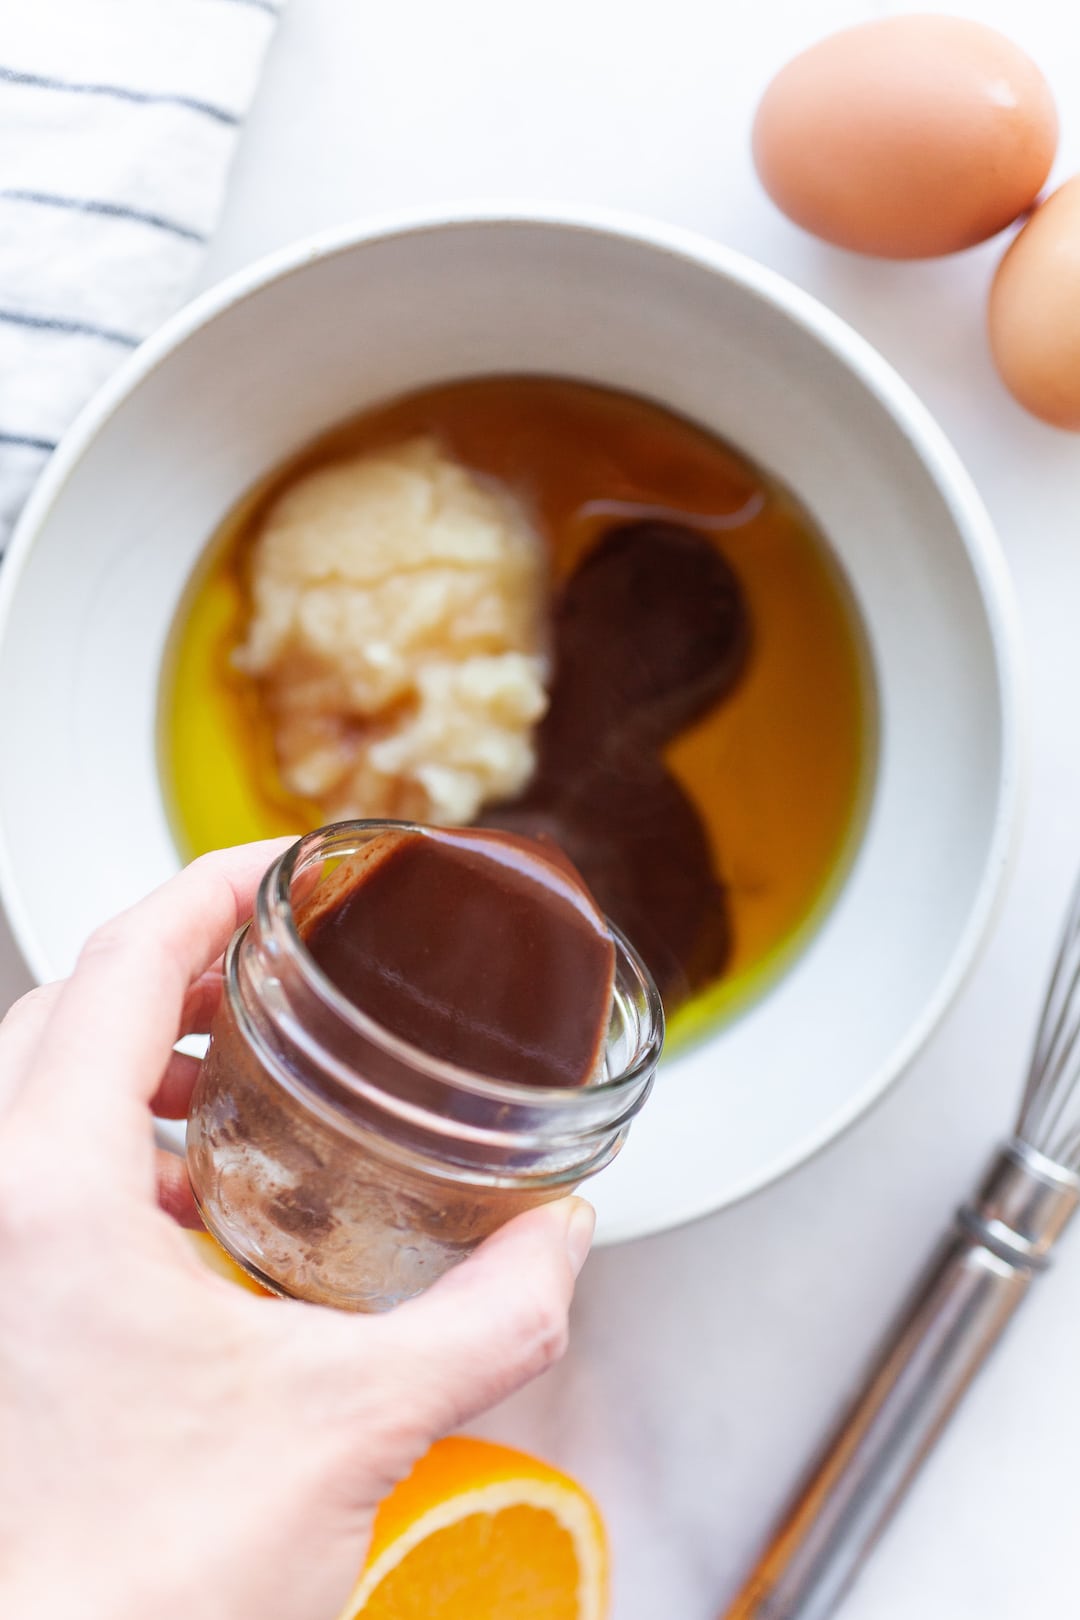 image of a bowl of wet ingredients for chocolate orange cupcakes with chocolate sauce being poured in